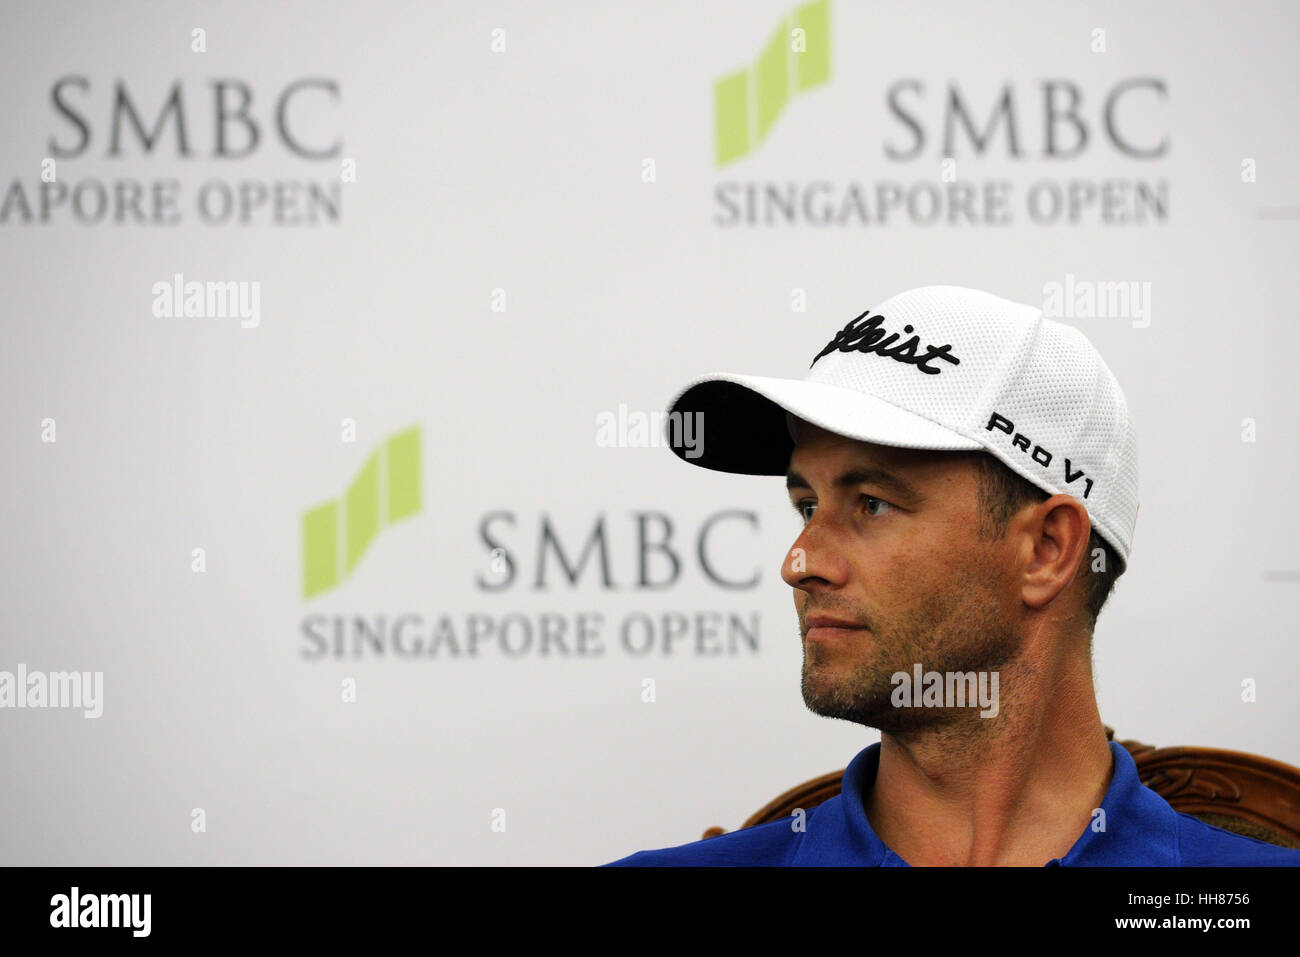 Singapore. 18th Jan, 2017. Australian golfer Adam Scott attends the Singapore Open golf tournament pre-competition press conference in Singapore, Jan. 18, 2017. The Singapore Open will be held at Singapore's Sentosa Golf Club from Jan. 19 to Jan. 22. Credit: Then Chih Wey/Xinhua/Alamy Live News Stock Photo